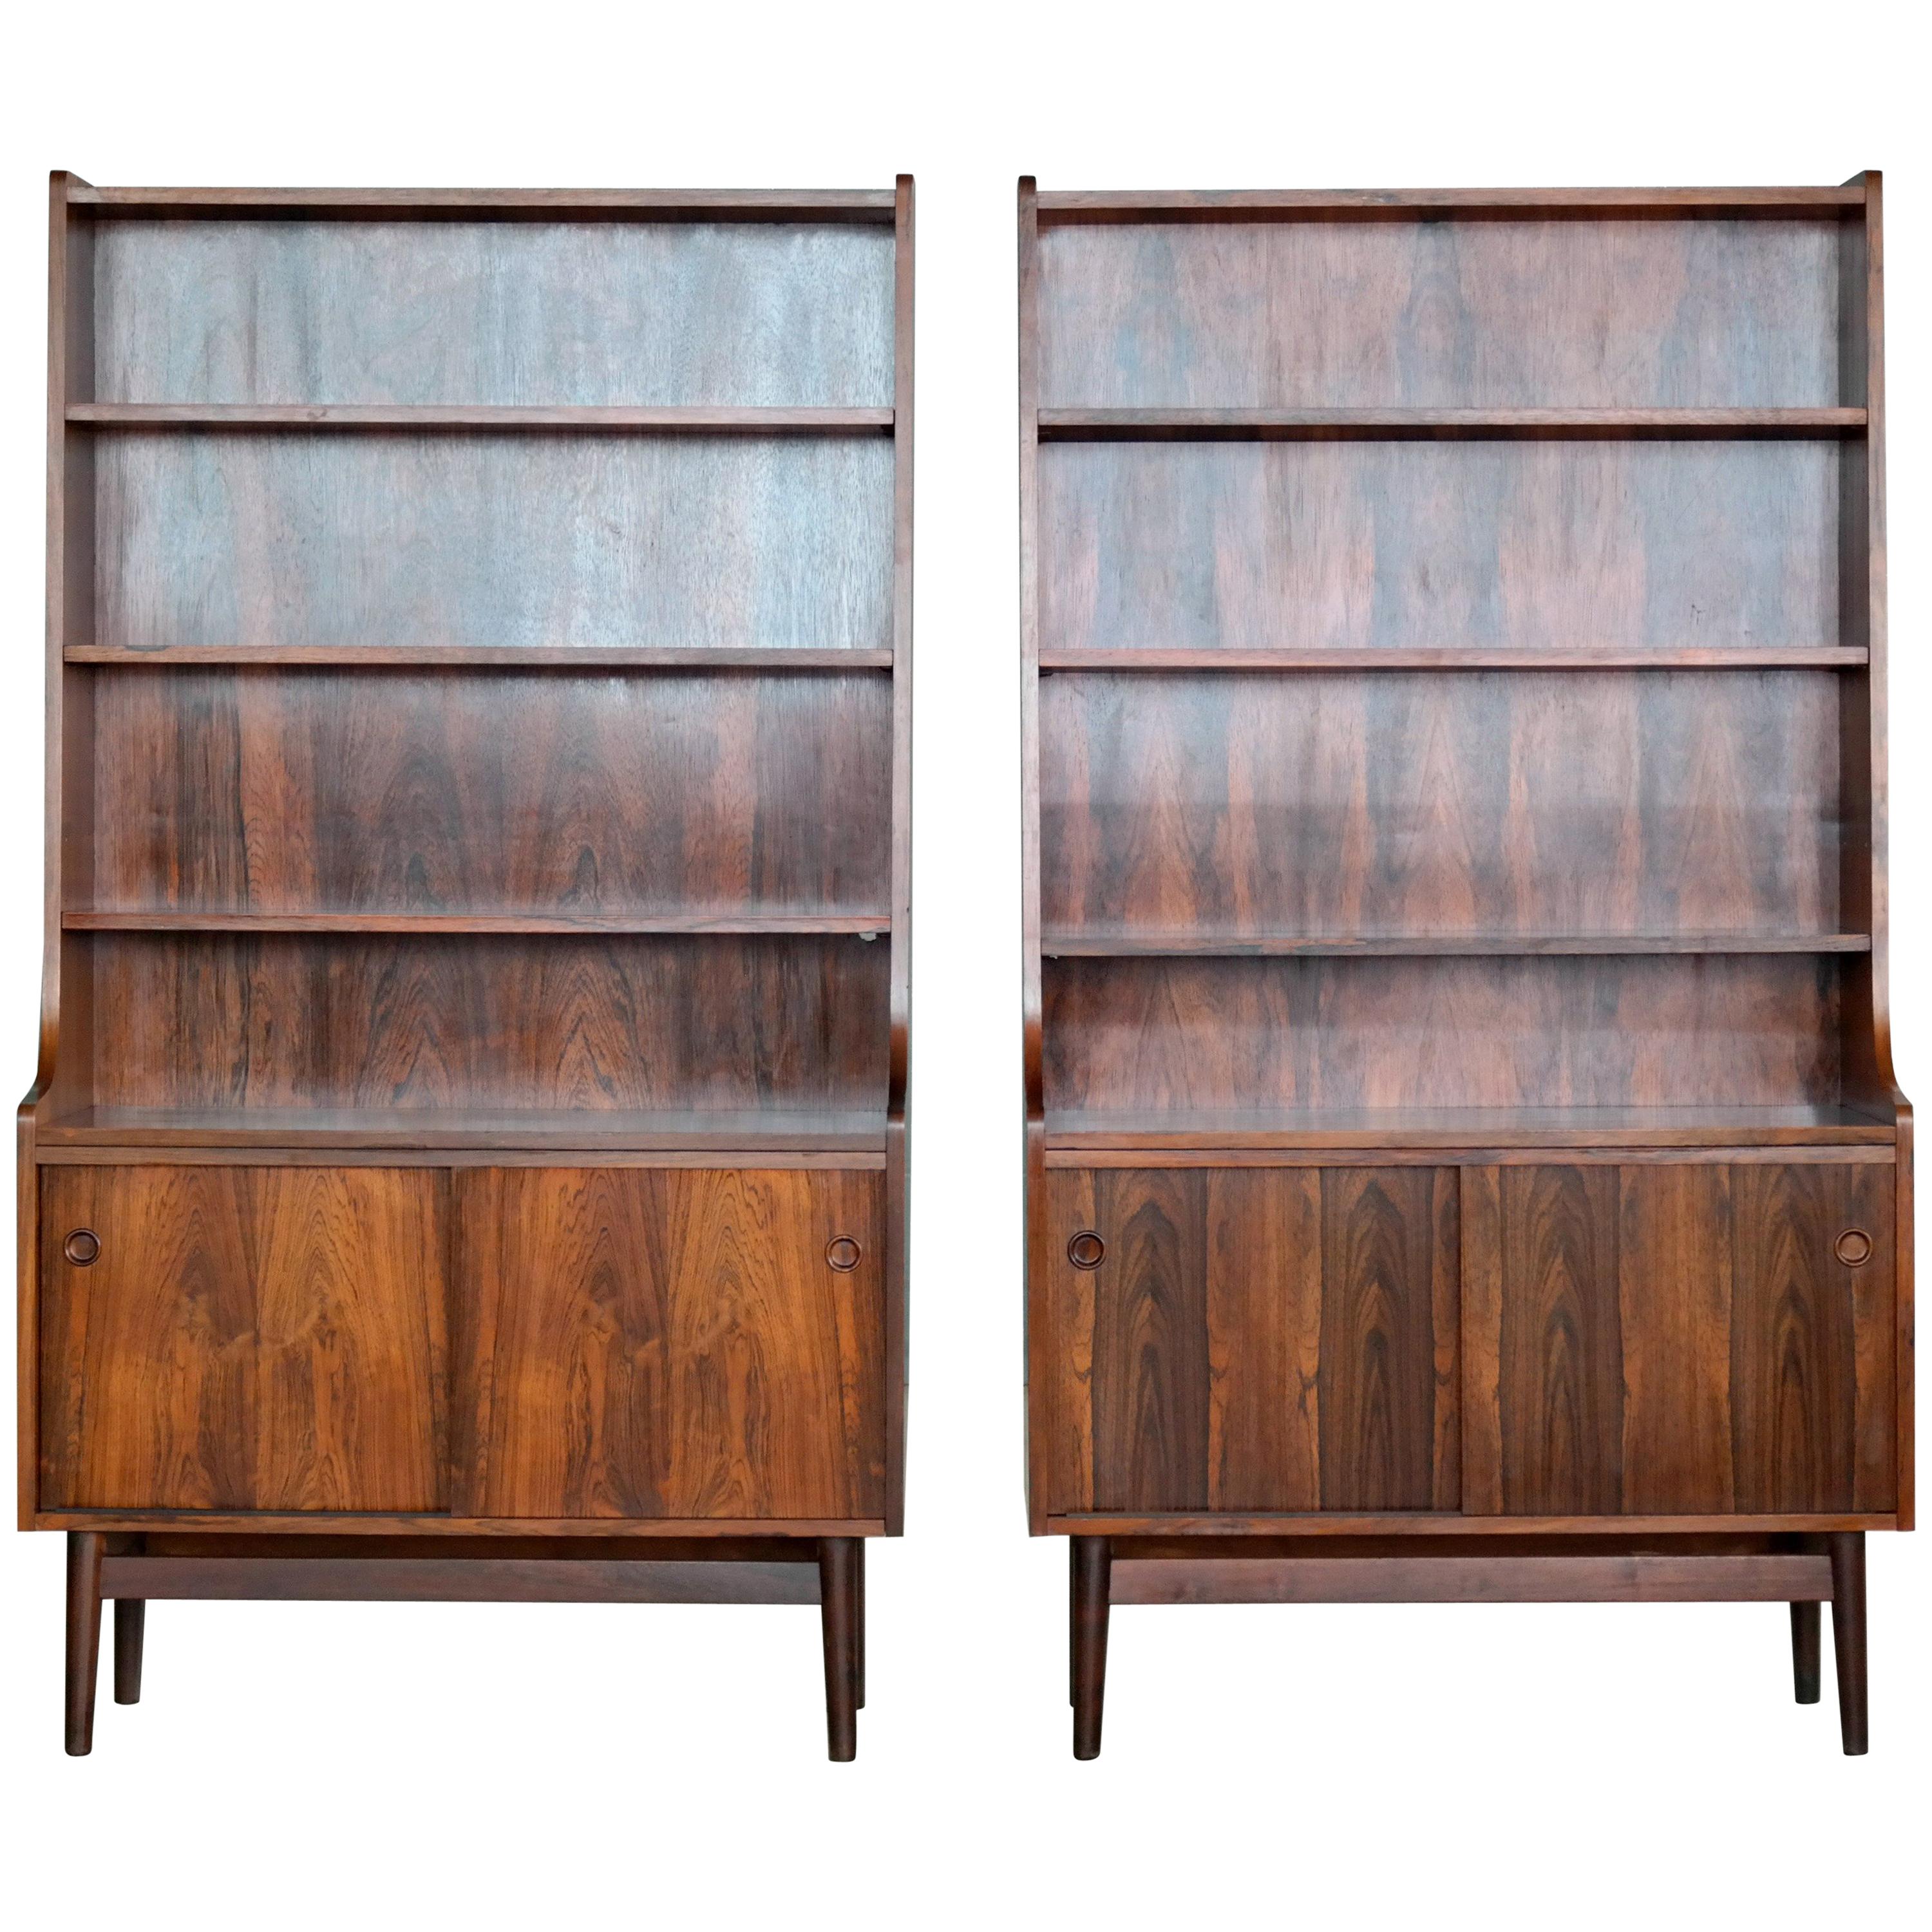 Danish Modern Midcentury Pair of Bookcases in Rosewood by Johannes Sorth